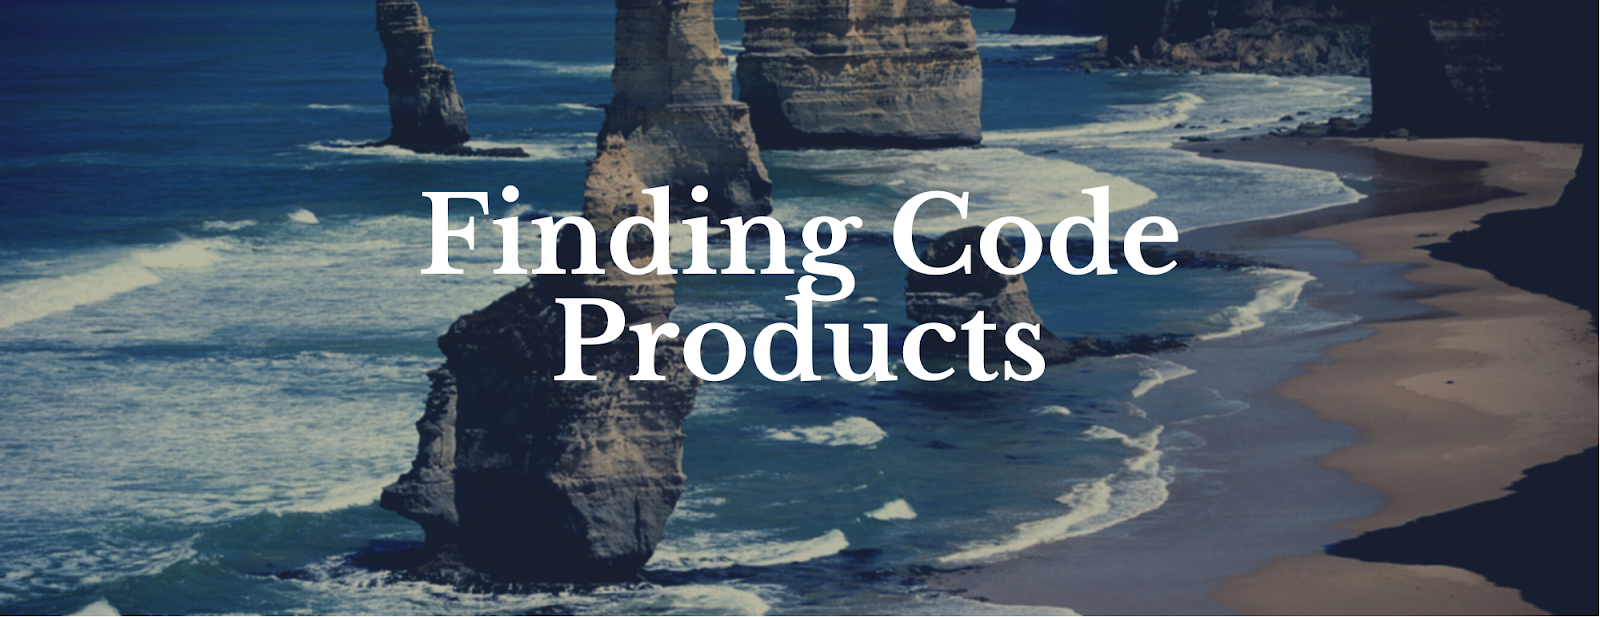 Finding Code Products